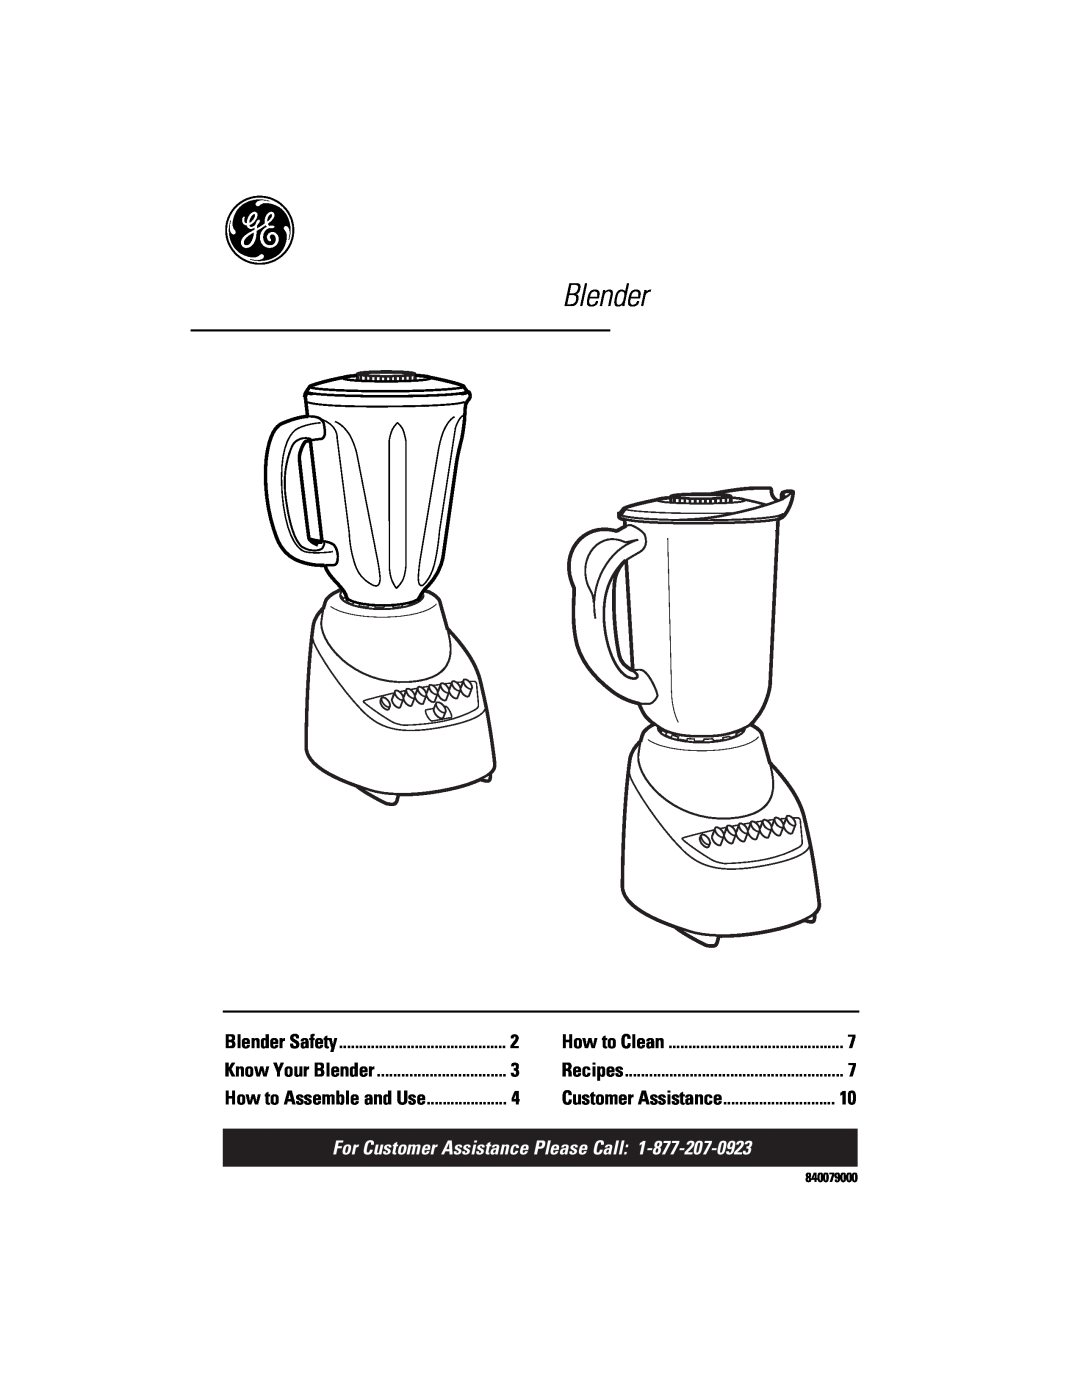 GE 106601 manual For Customer Assistance Please Call, Blender Safety, Know Your Blender, How to Assemble and Use 